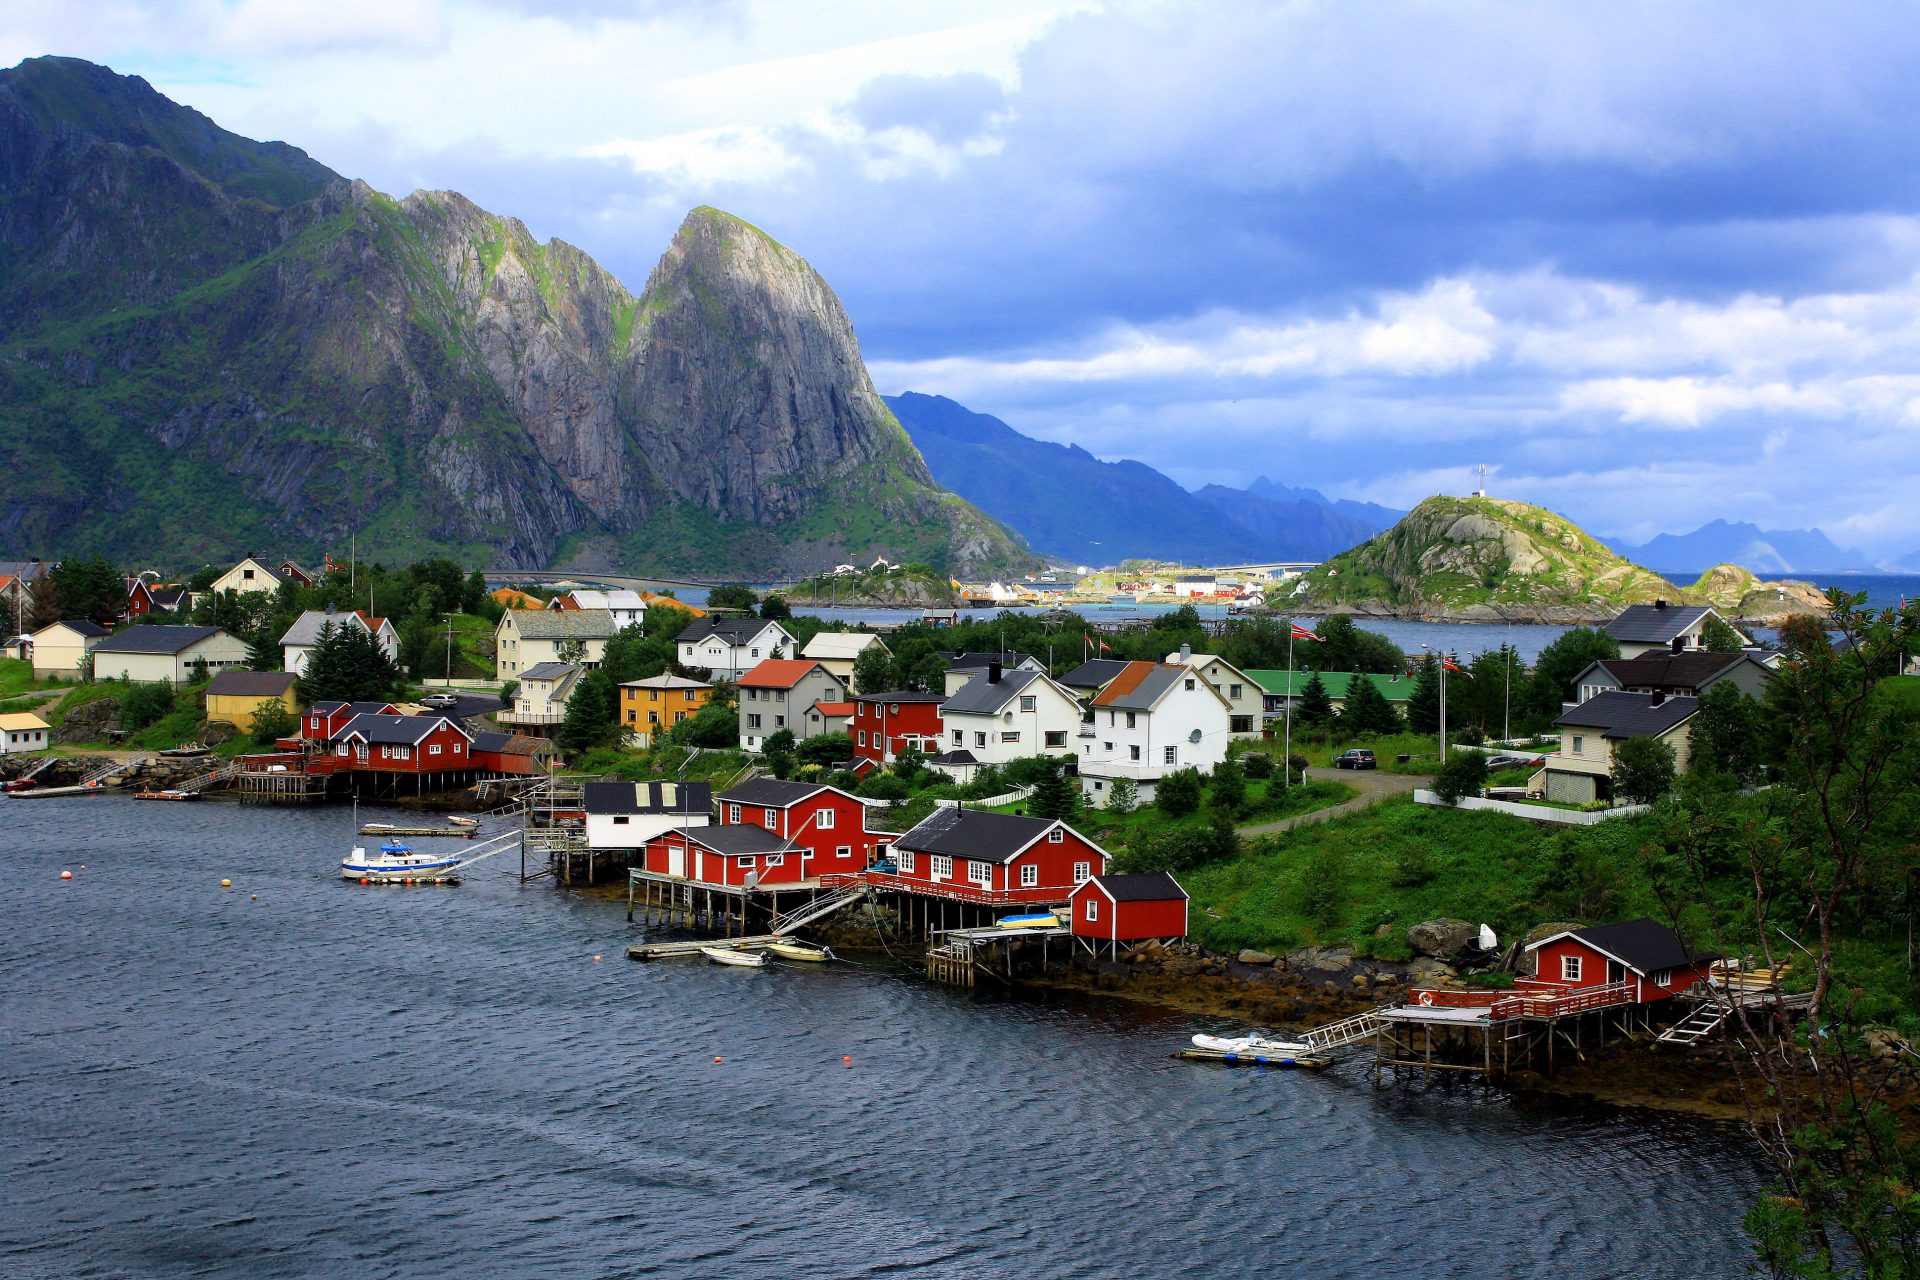 <p>Norway is known as one of the happiest countries on the planet. According to CNN, Crown Prince Haakon and Crown Princess Mette-Marit, say it is due to their love of nature. Princess Mette-Marit said,<br> "We love being outside in nature. If you're in a Norwegian home on a Sunday and you don't go for a walk in the forest ... that's not good."</p>